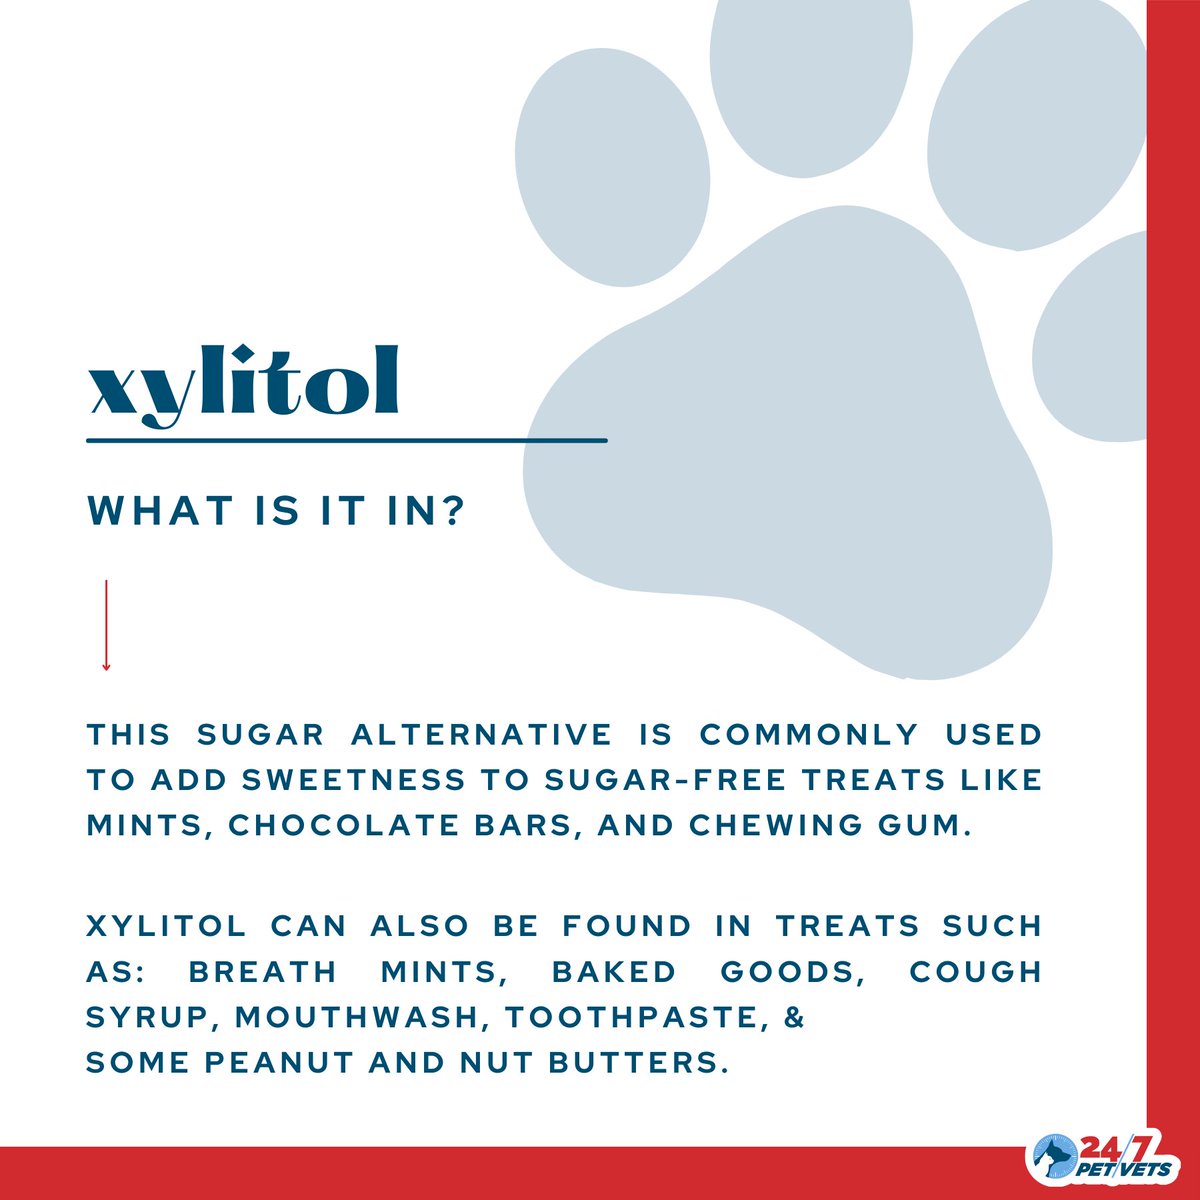 Know the risks of Xylitol, a sugar substitute that can be harmful to pets. Keep these items out of reach, and keep your furry friends safe! 🐾🚨 #PetSafety #PoisonPreventionAwareness